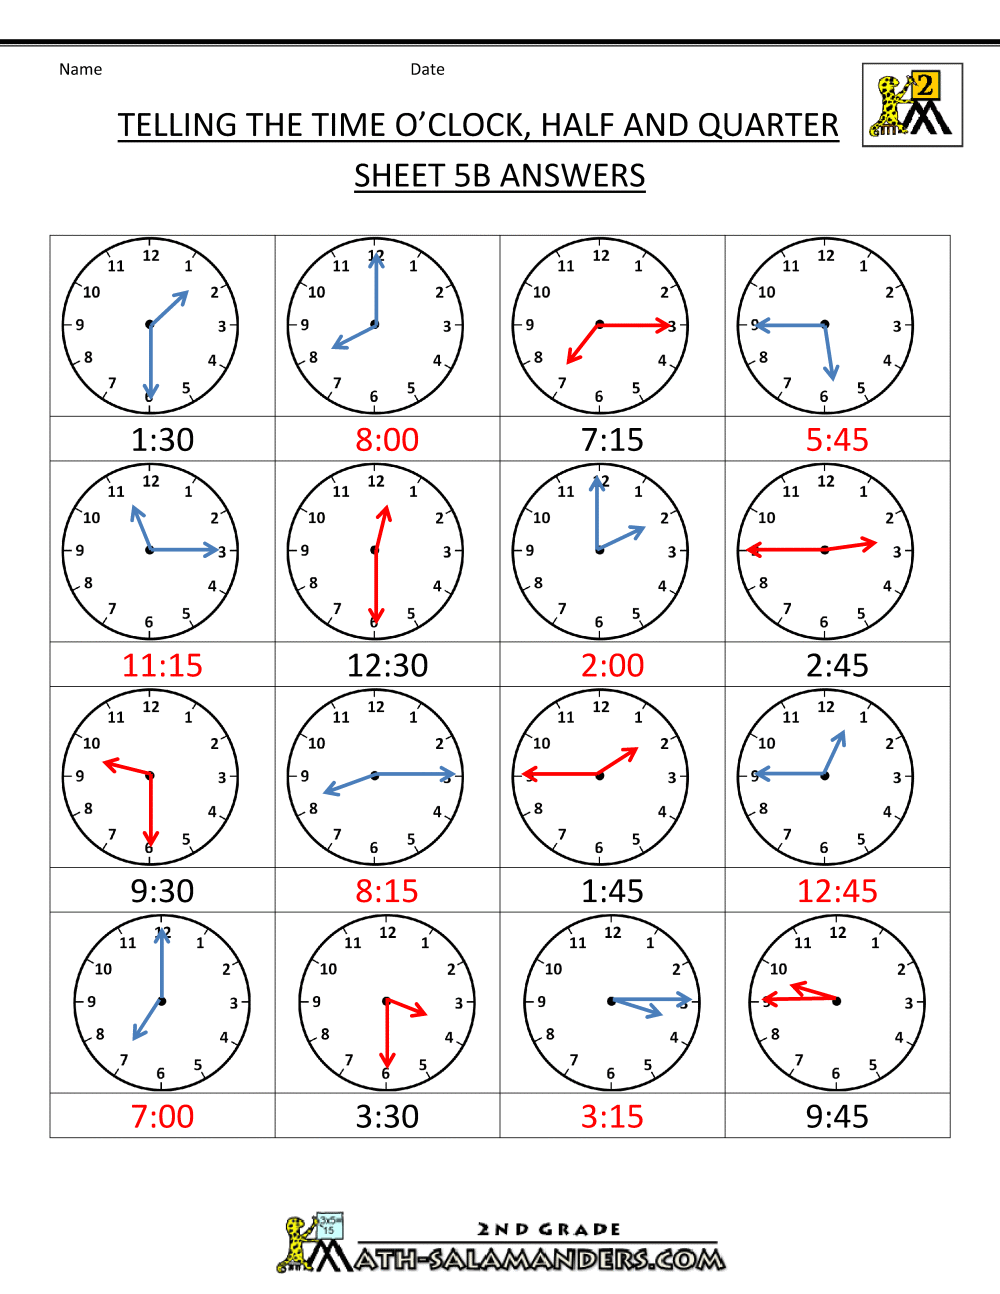 Telling The Time 5 Minute Intervals Worksheets